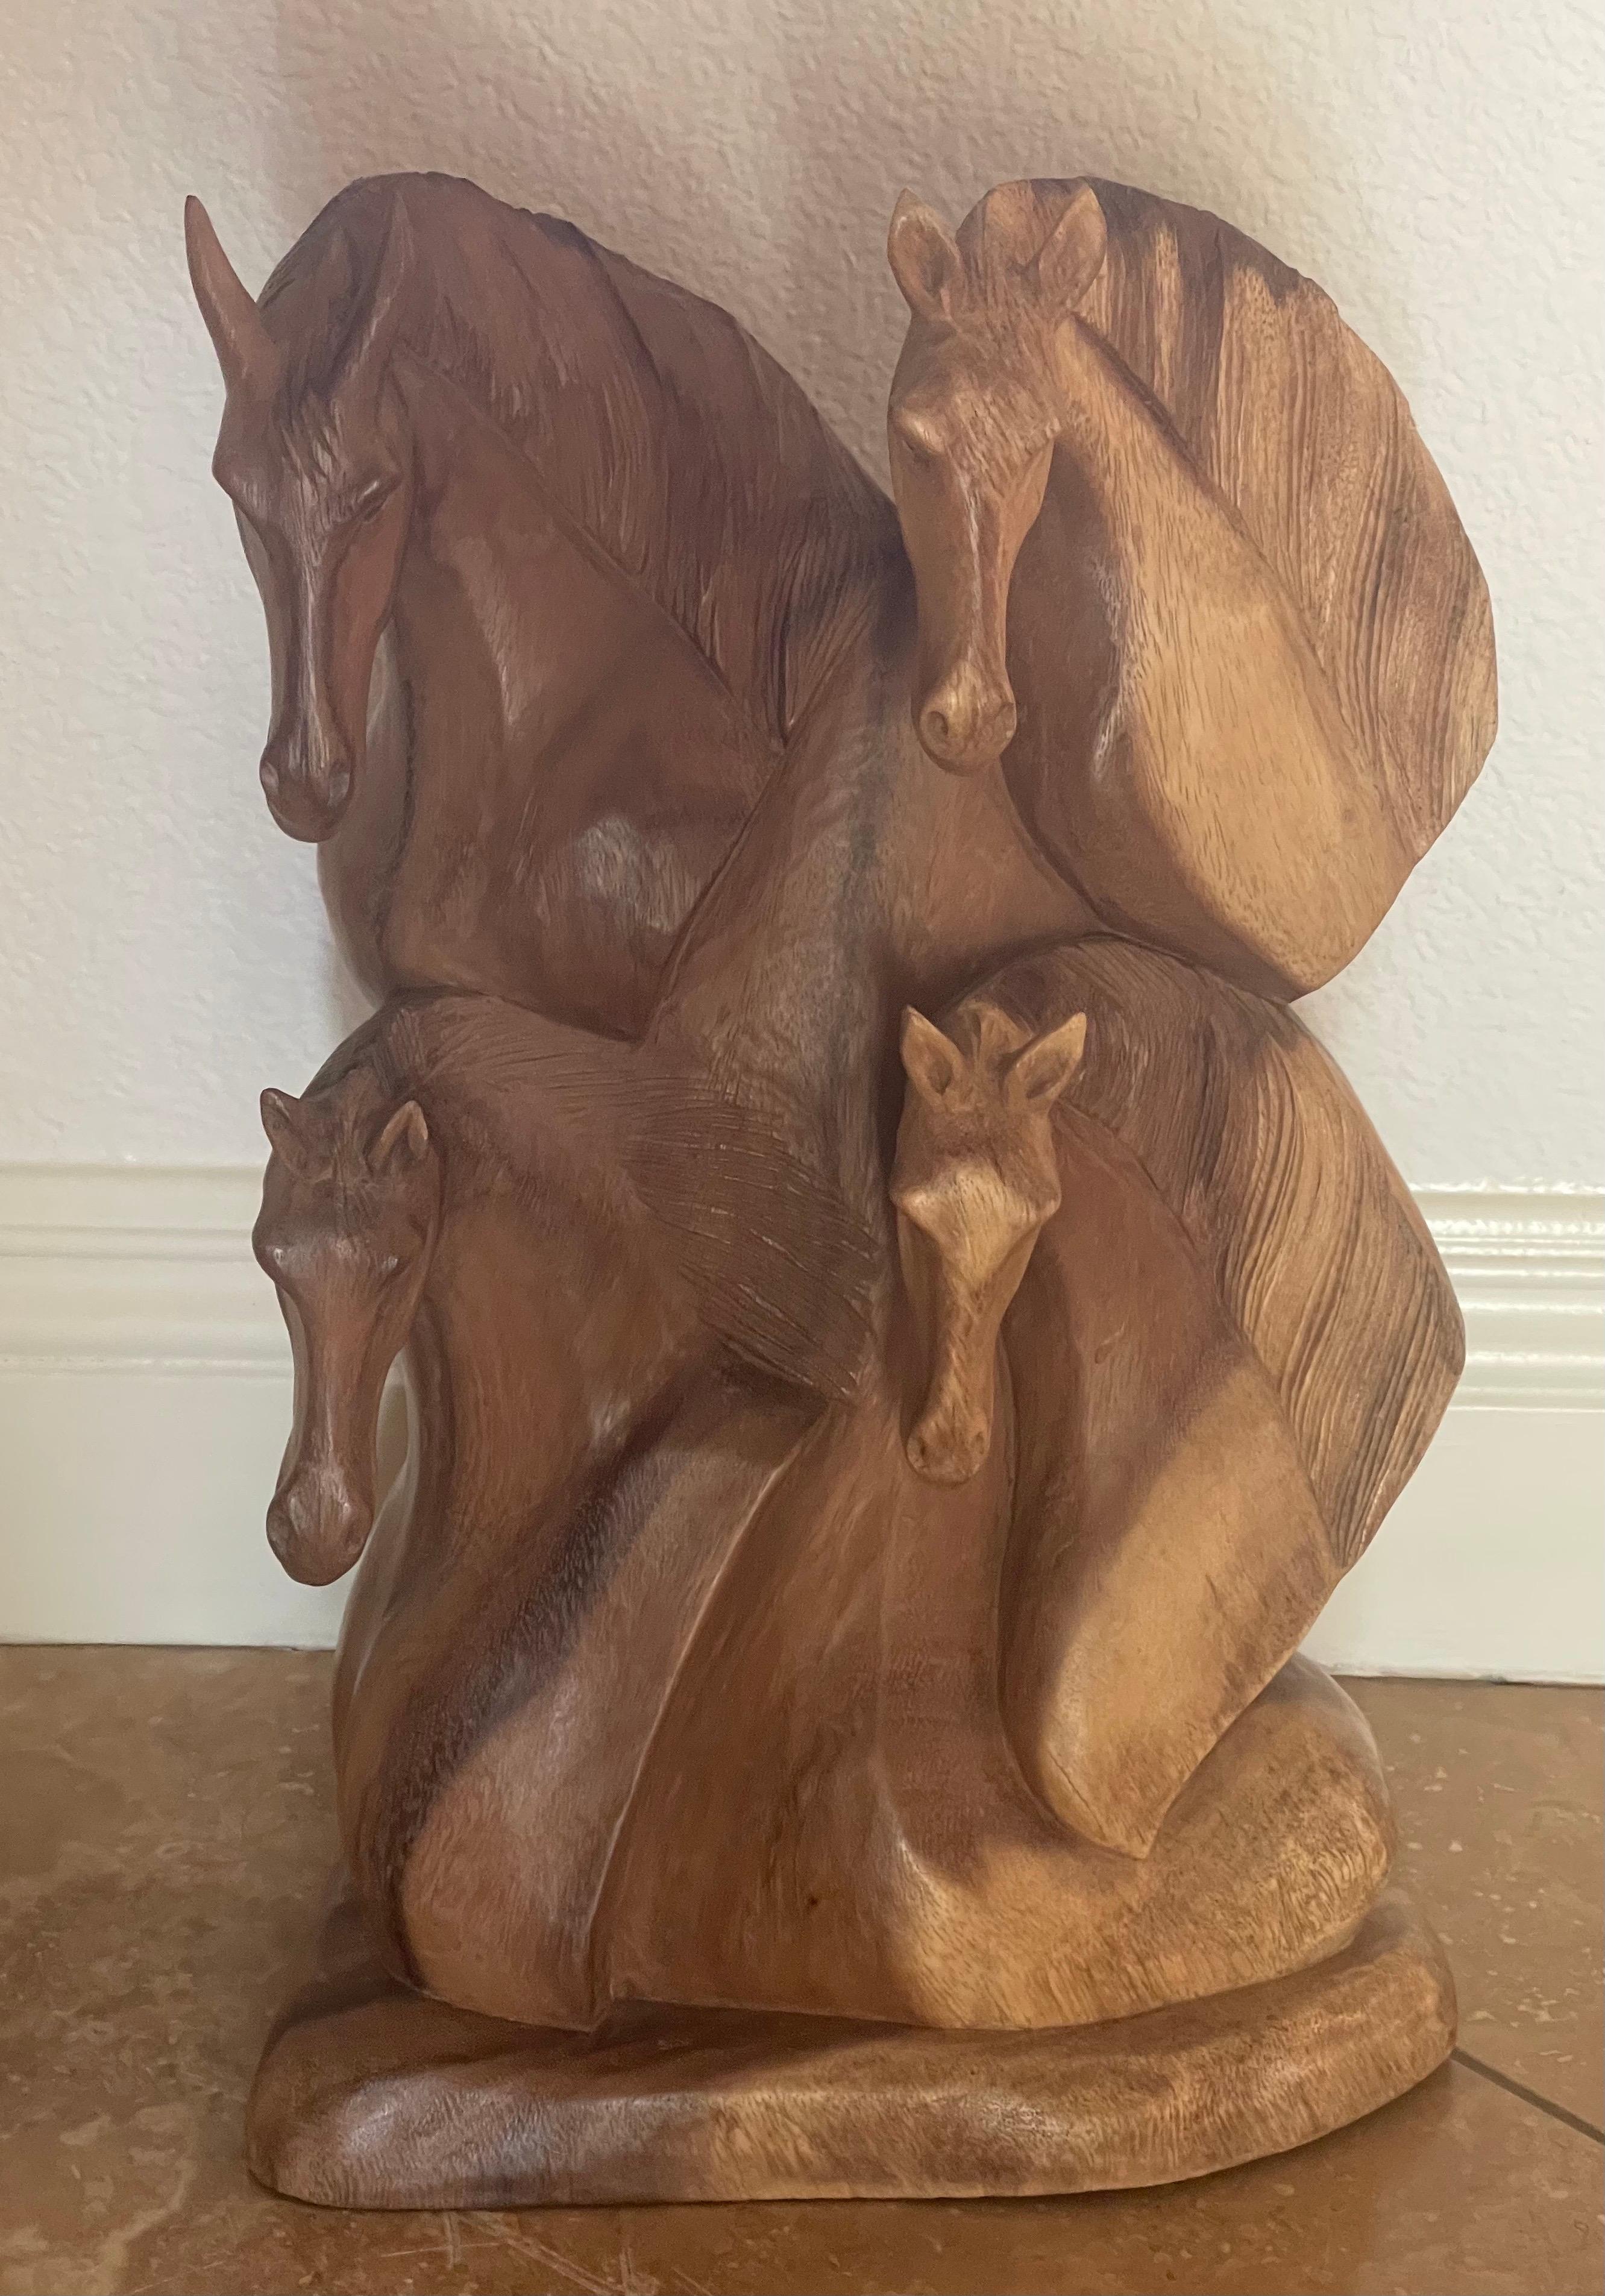 Fine hand carved hardwood four horse head sculpture, circa 1980s. This large statement piece has been intricately crafted and makes a great addition to any decor. The piece is in very good condition and measures 10.5